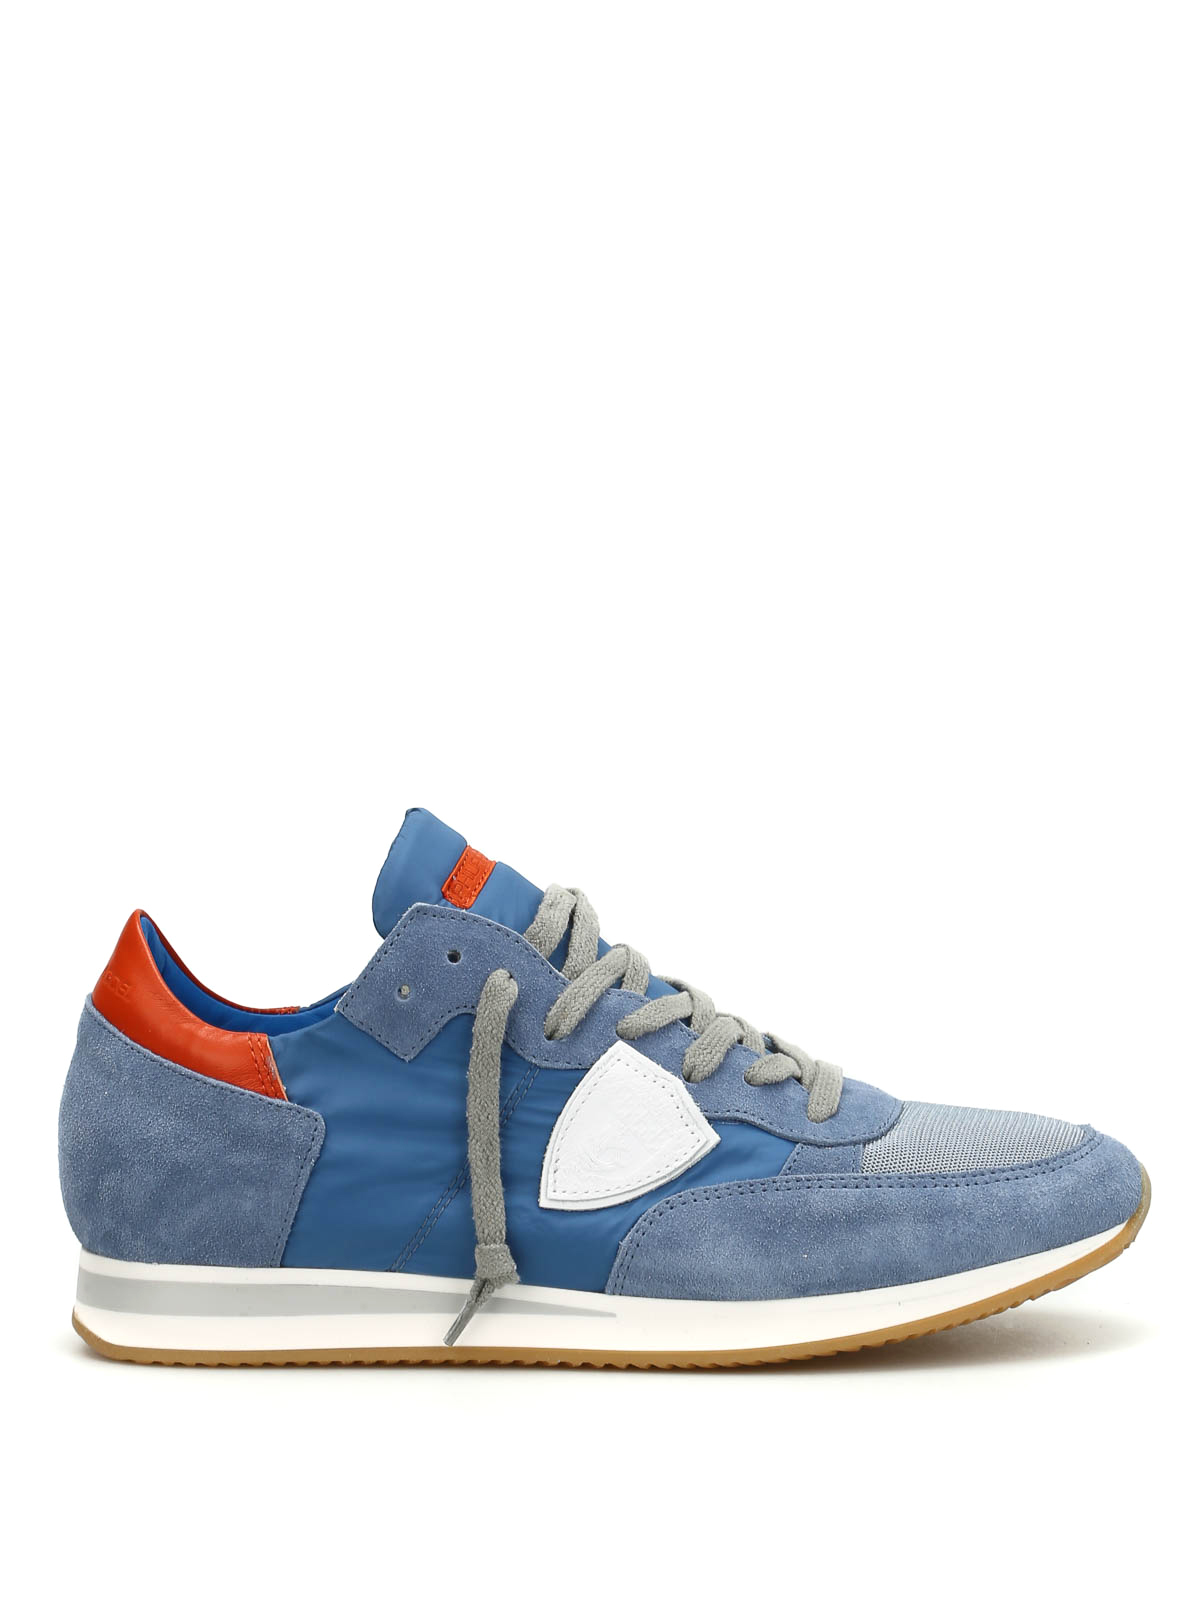 Trainers Philippe Model - Tropez suede and nylon sneakers - TRLUWX35